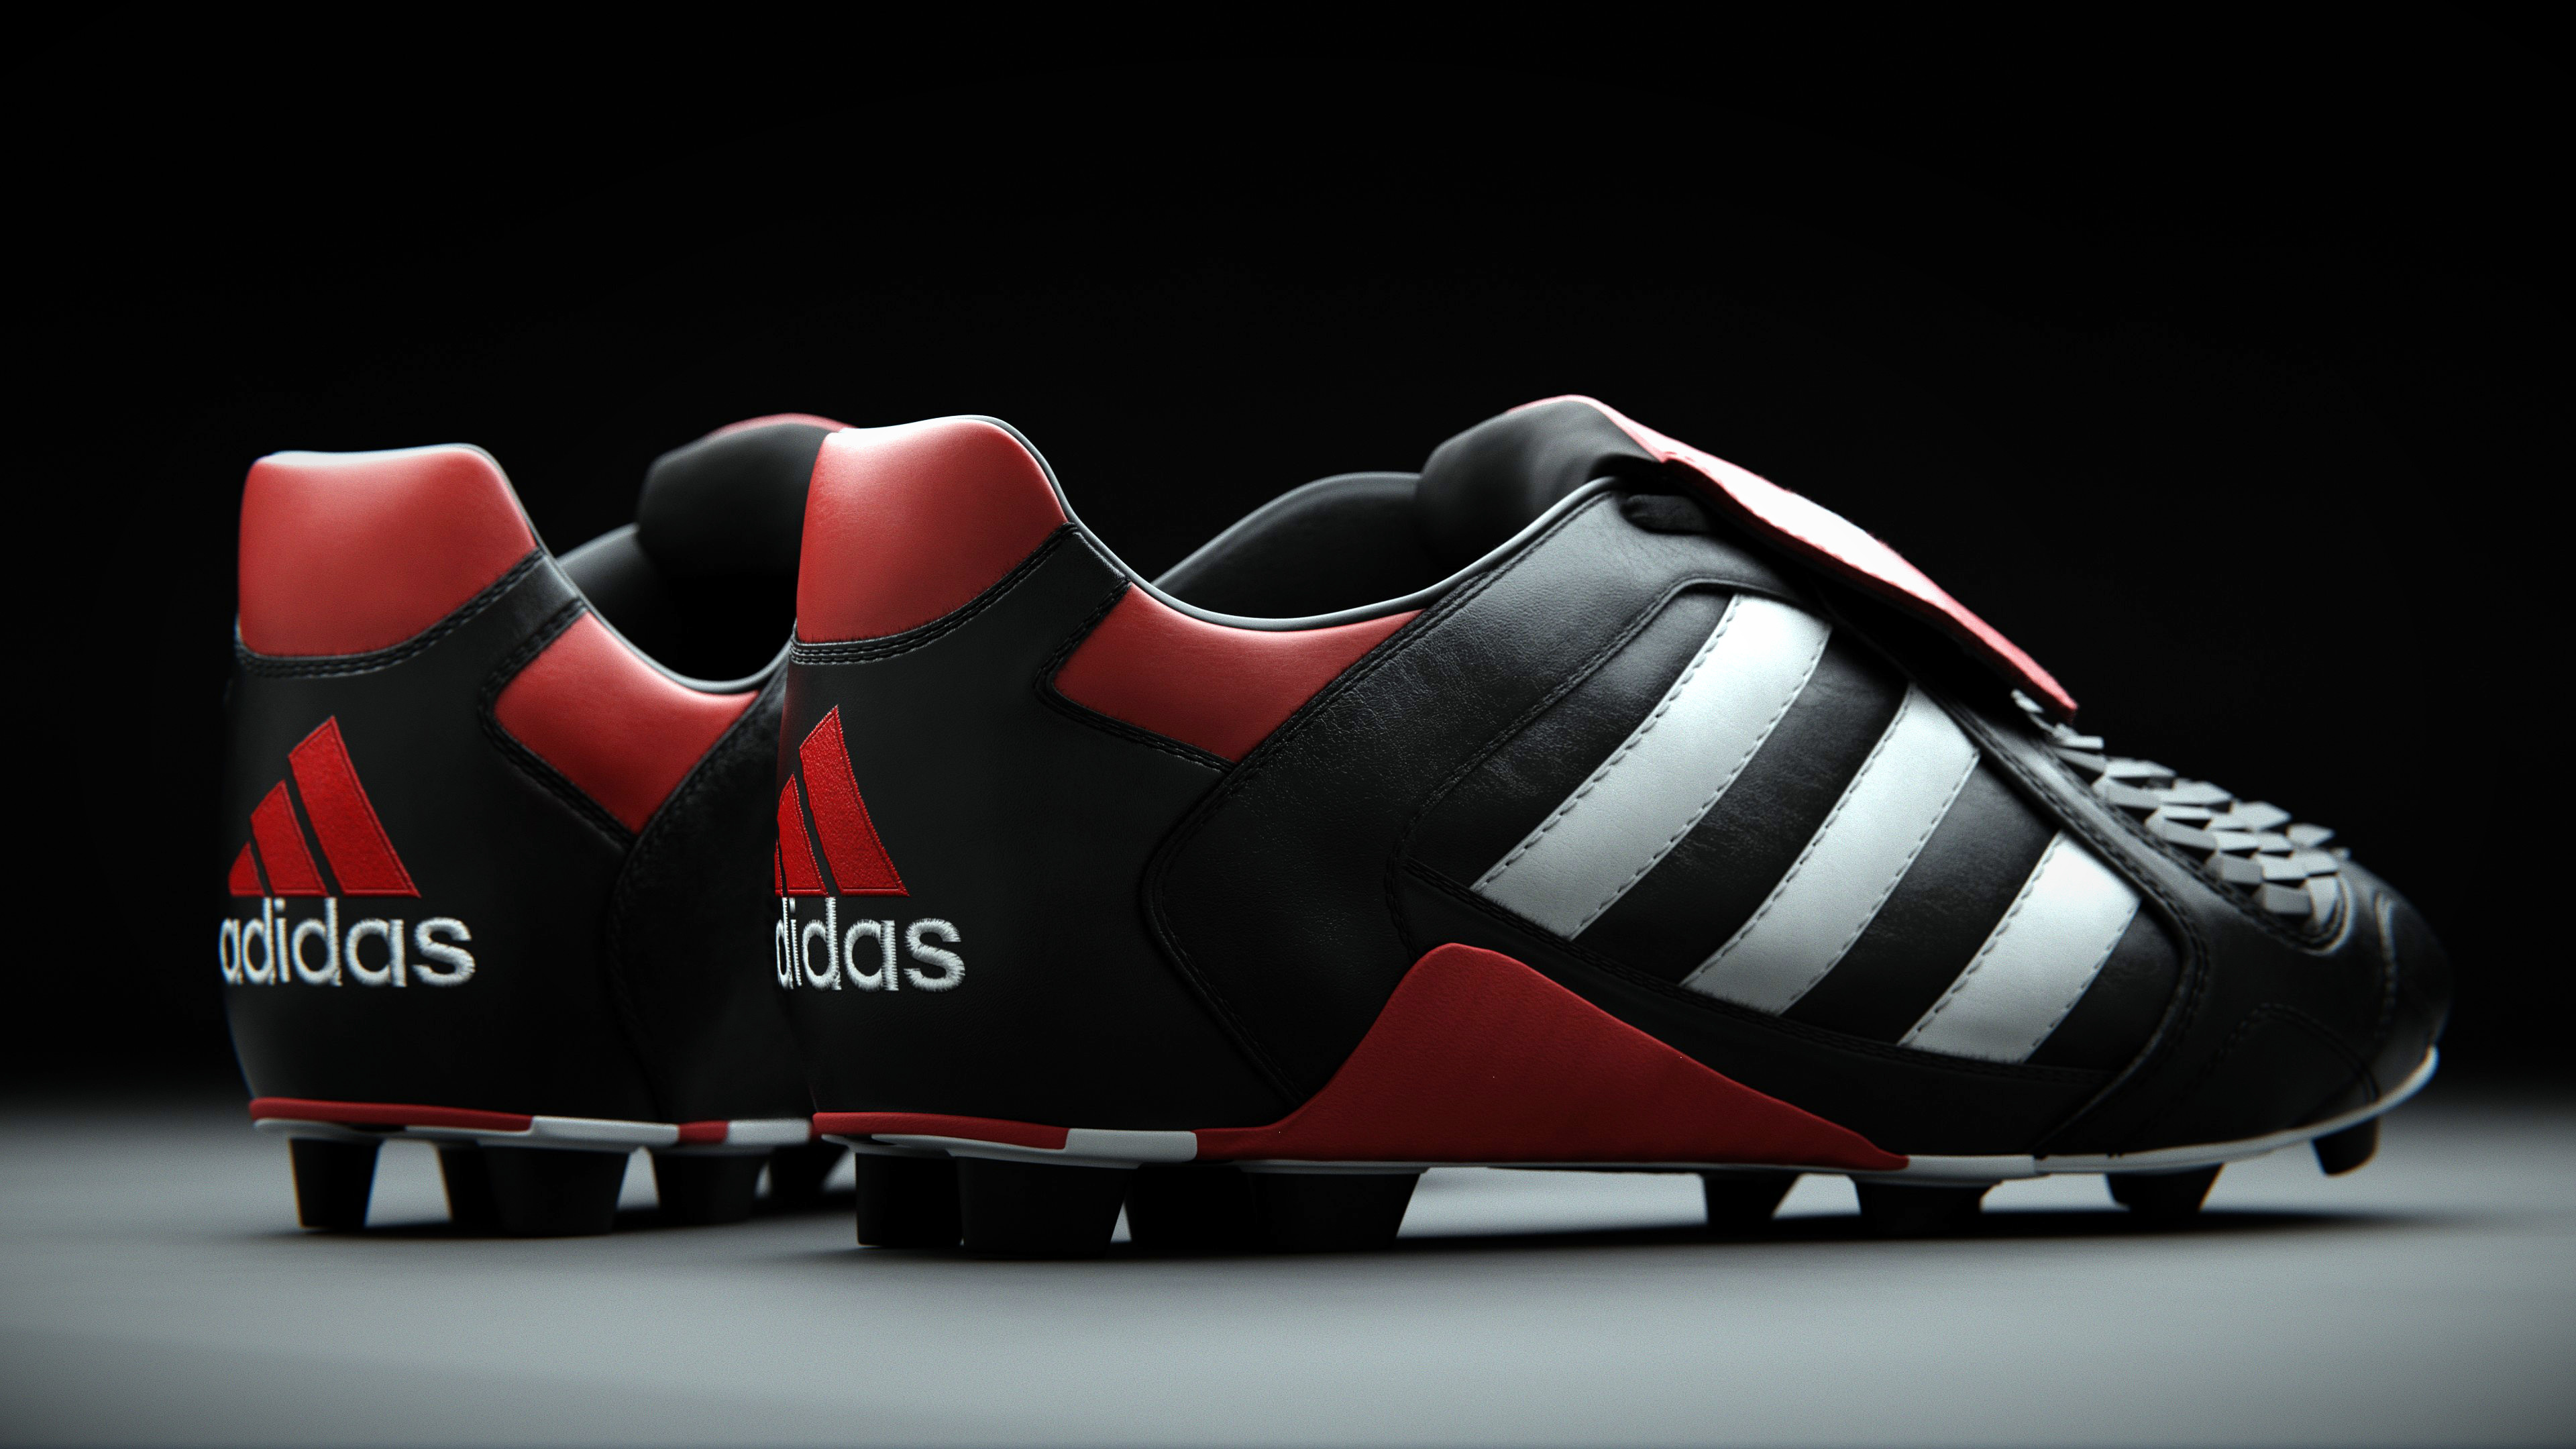 africano Confirmación lucha Adidas Predator Touch 96 - Finished Projects - Blender Artists Community